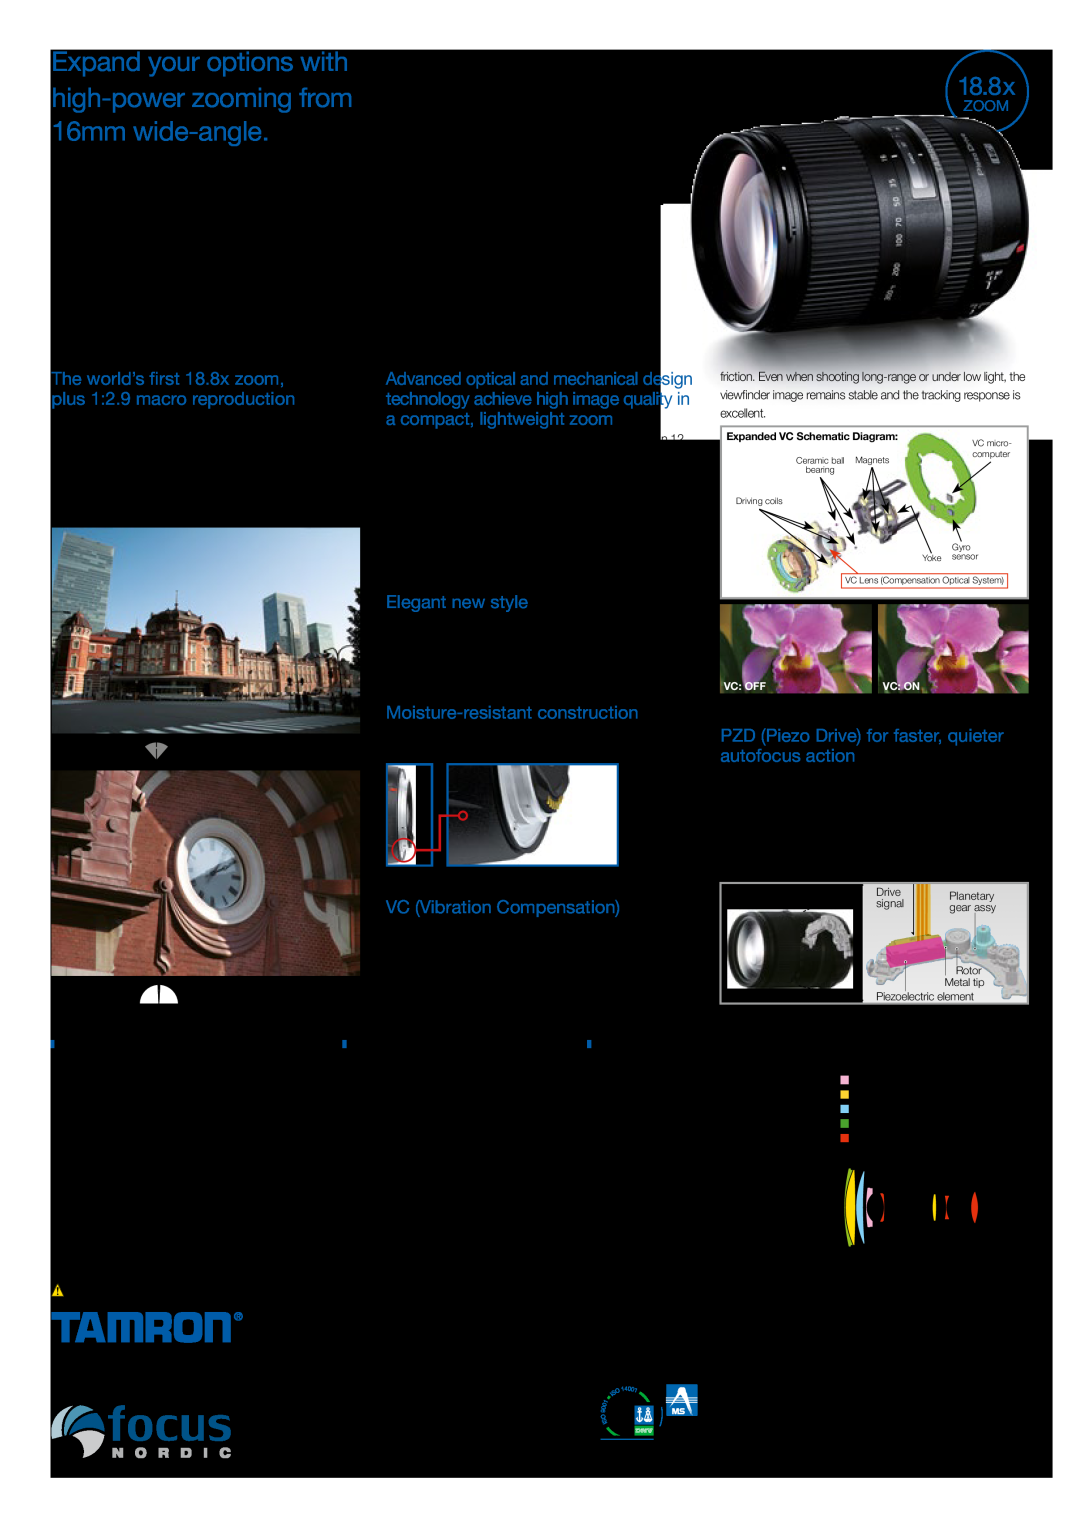 Tamron AFB016N700 manual Expand your options with high-power zooming from 16mm wide-angle, 18.8x, Elegant new style, Zoom 